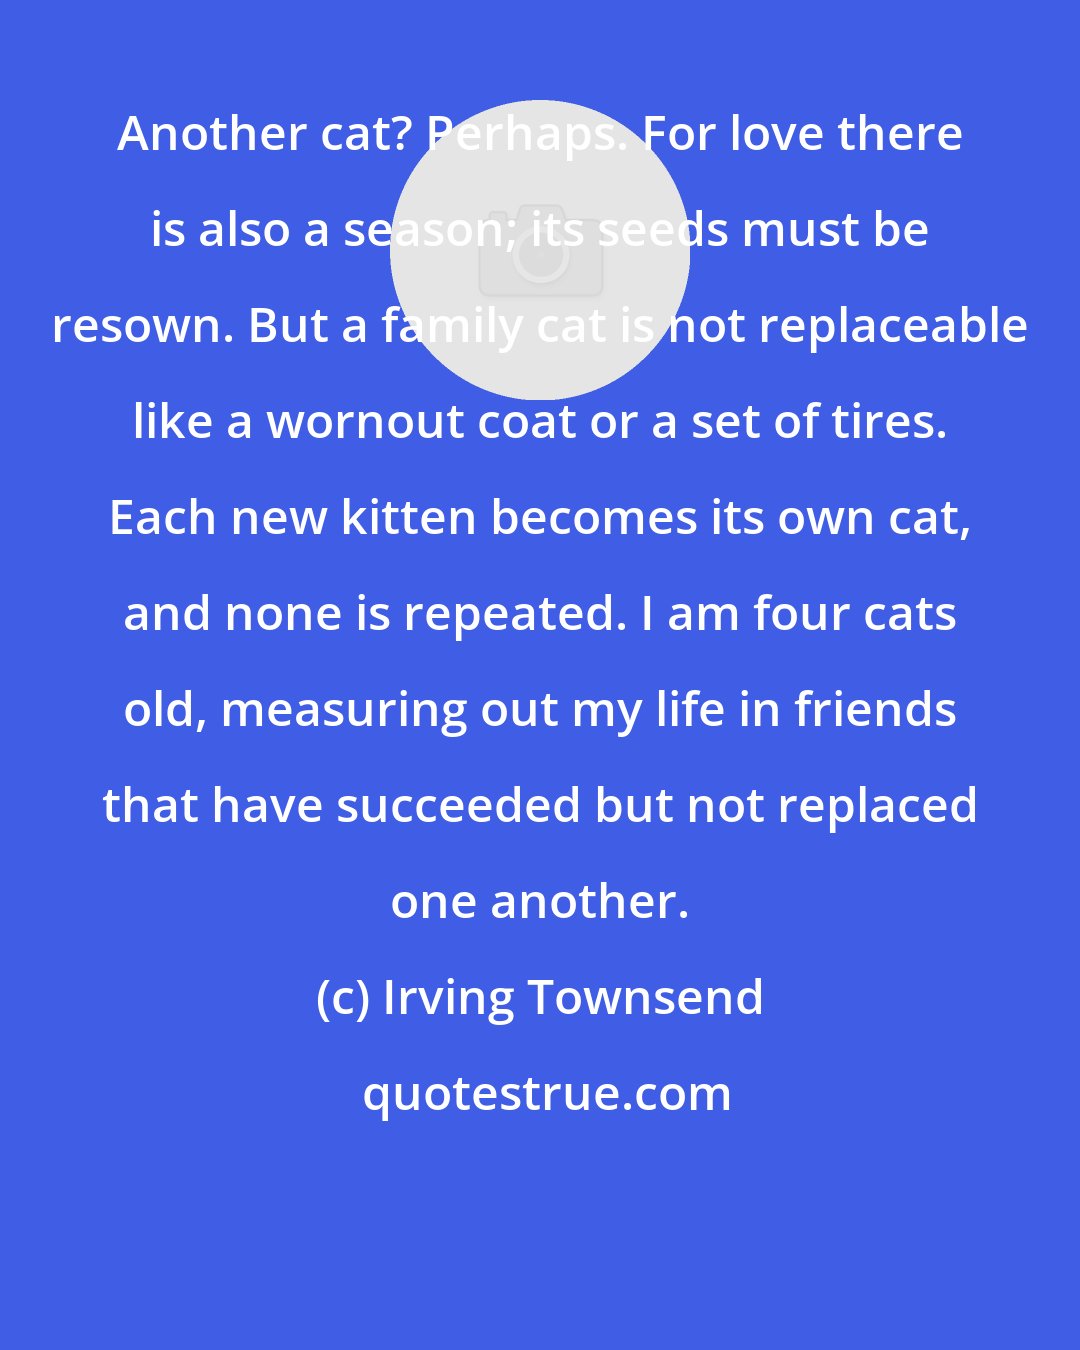 Irving Townsend: Another cat? Perhaps. For love there is also a season; its seeds must be resown. But a family cat is not replaceable like a wornout coat or a set of tires. Each new kitten becomes its own cat, and none is repeated. I am four cats old, measuring out my life in friends that have succeeded but not replaced one another.